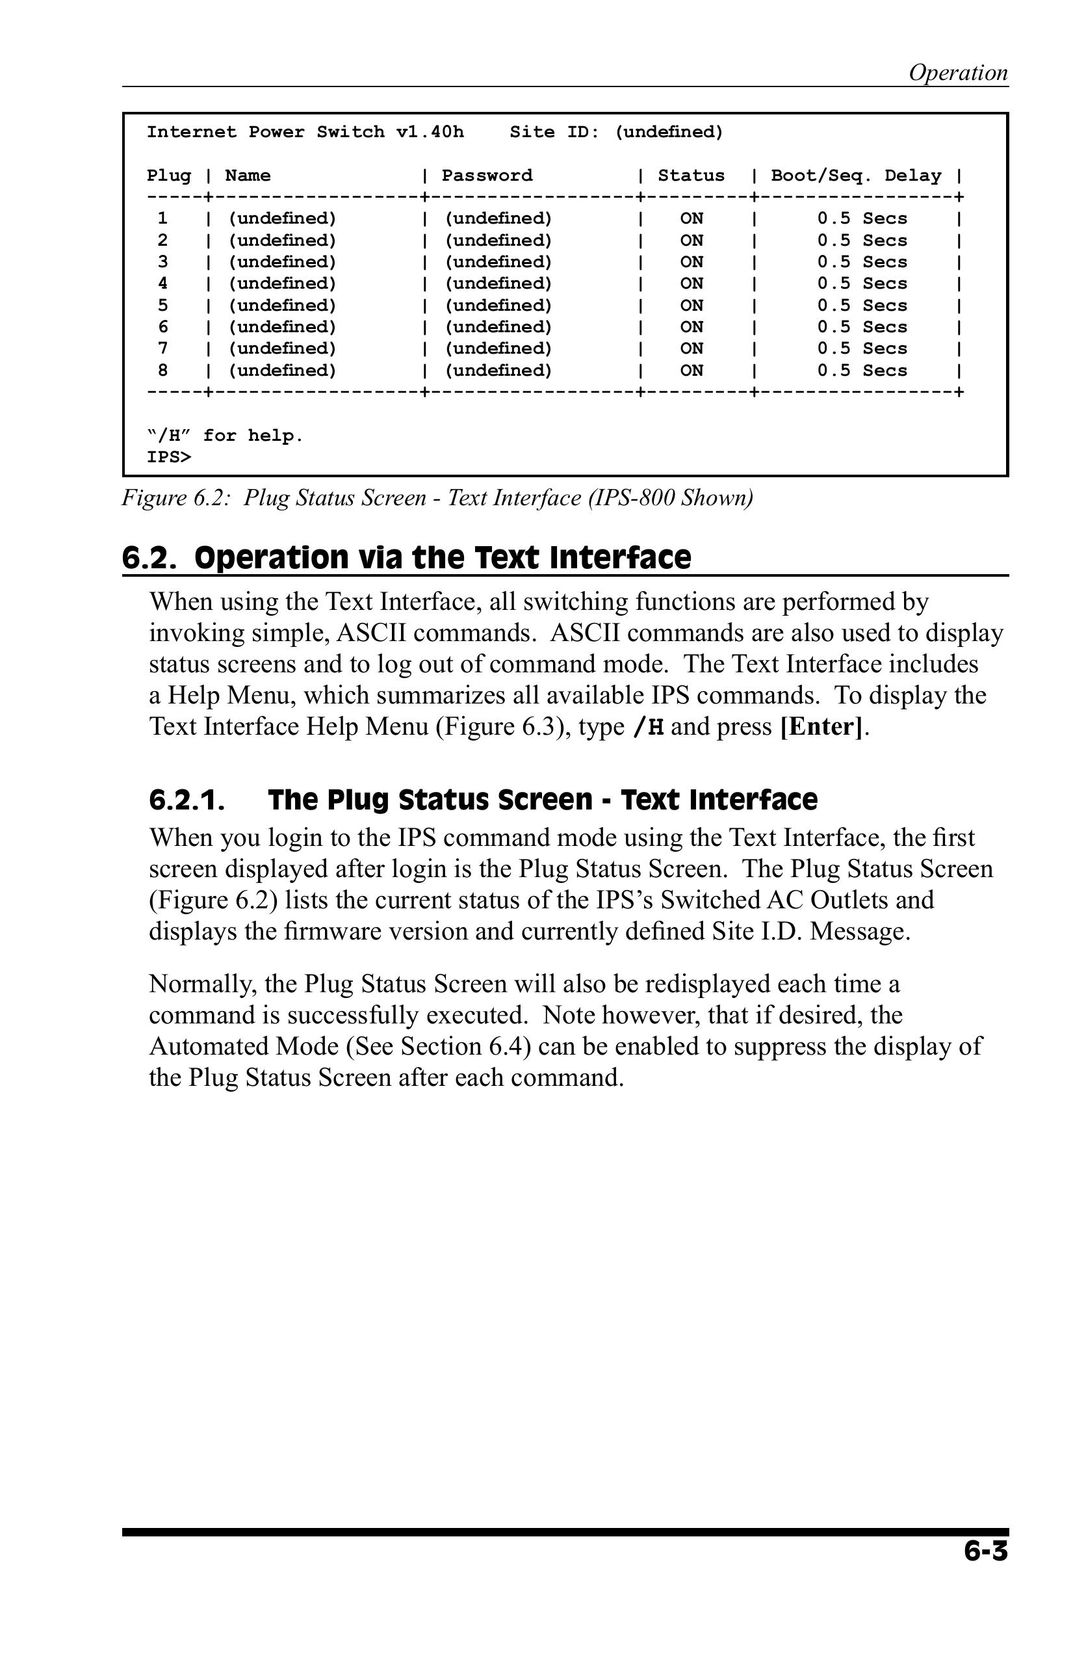 Western Telematic IPS-1600 Switch User Manual (Page 41)